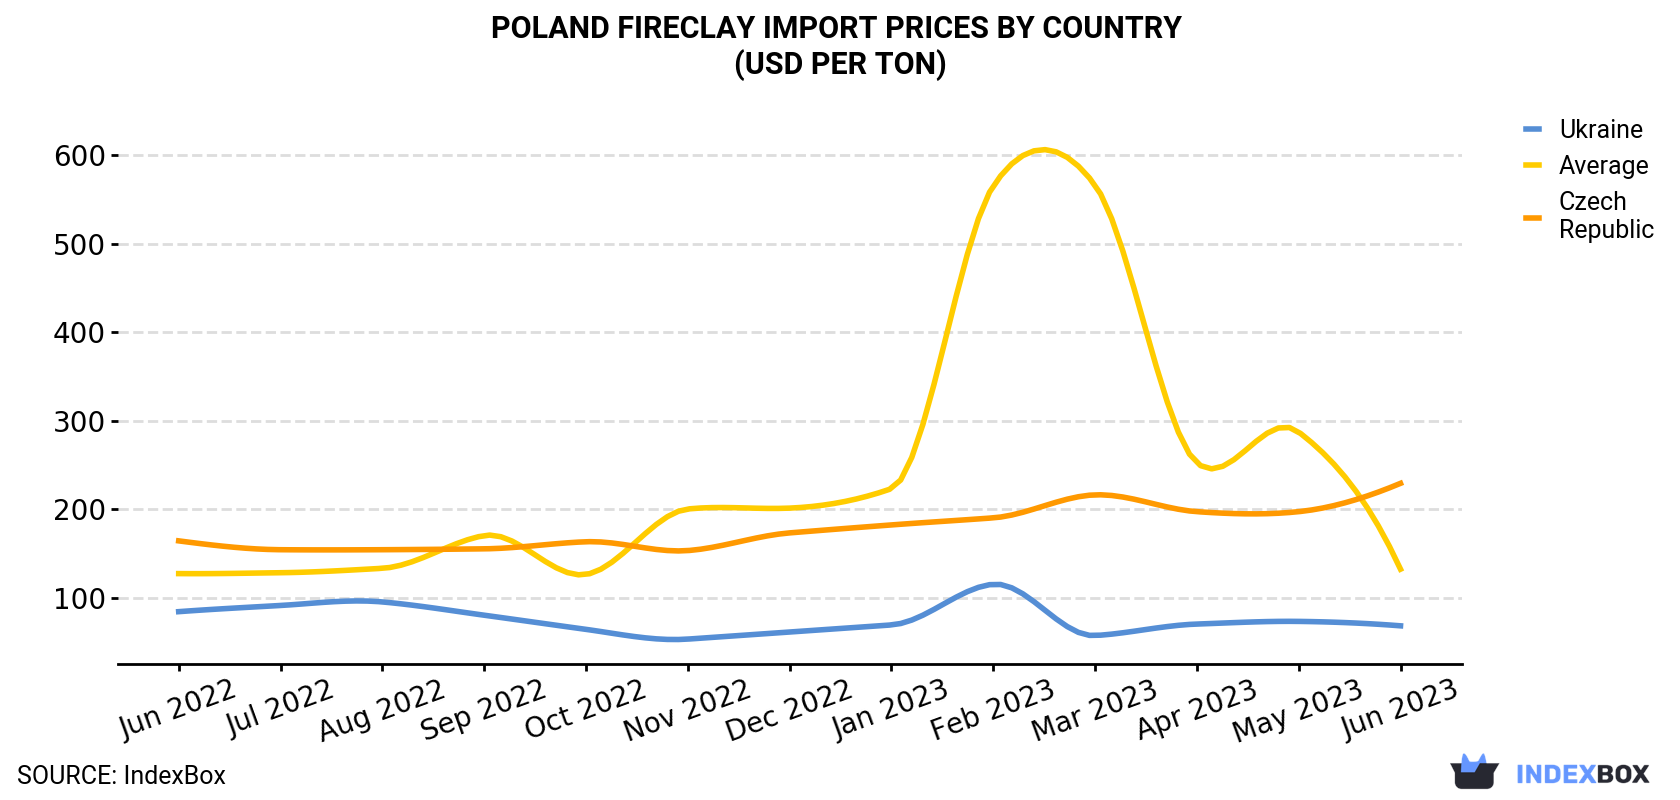 Poland Fireclay Import Prices By Country (USD Per Ton)